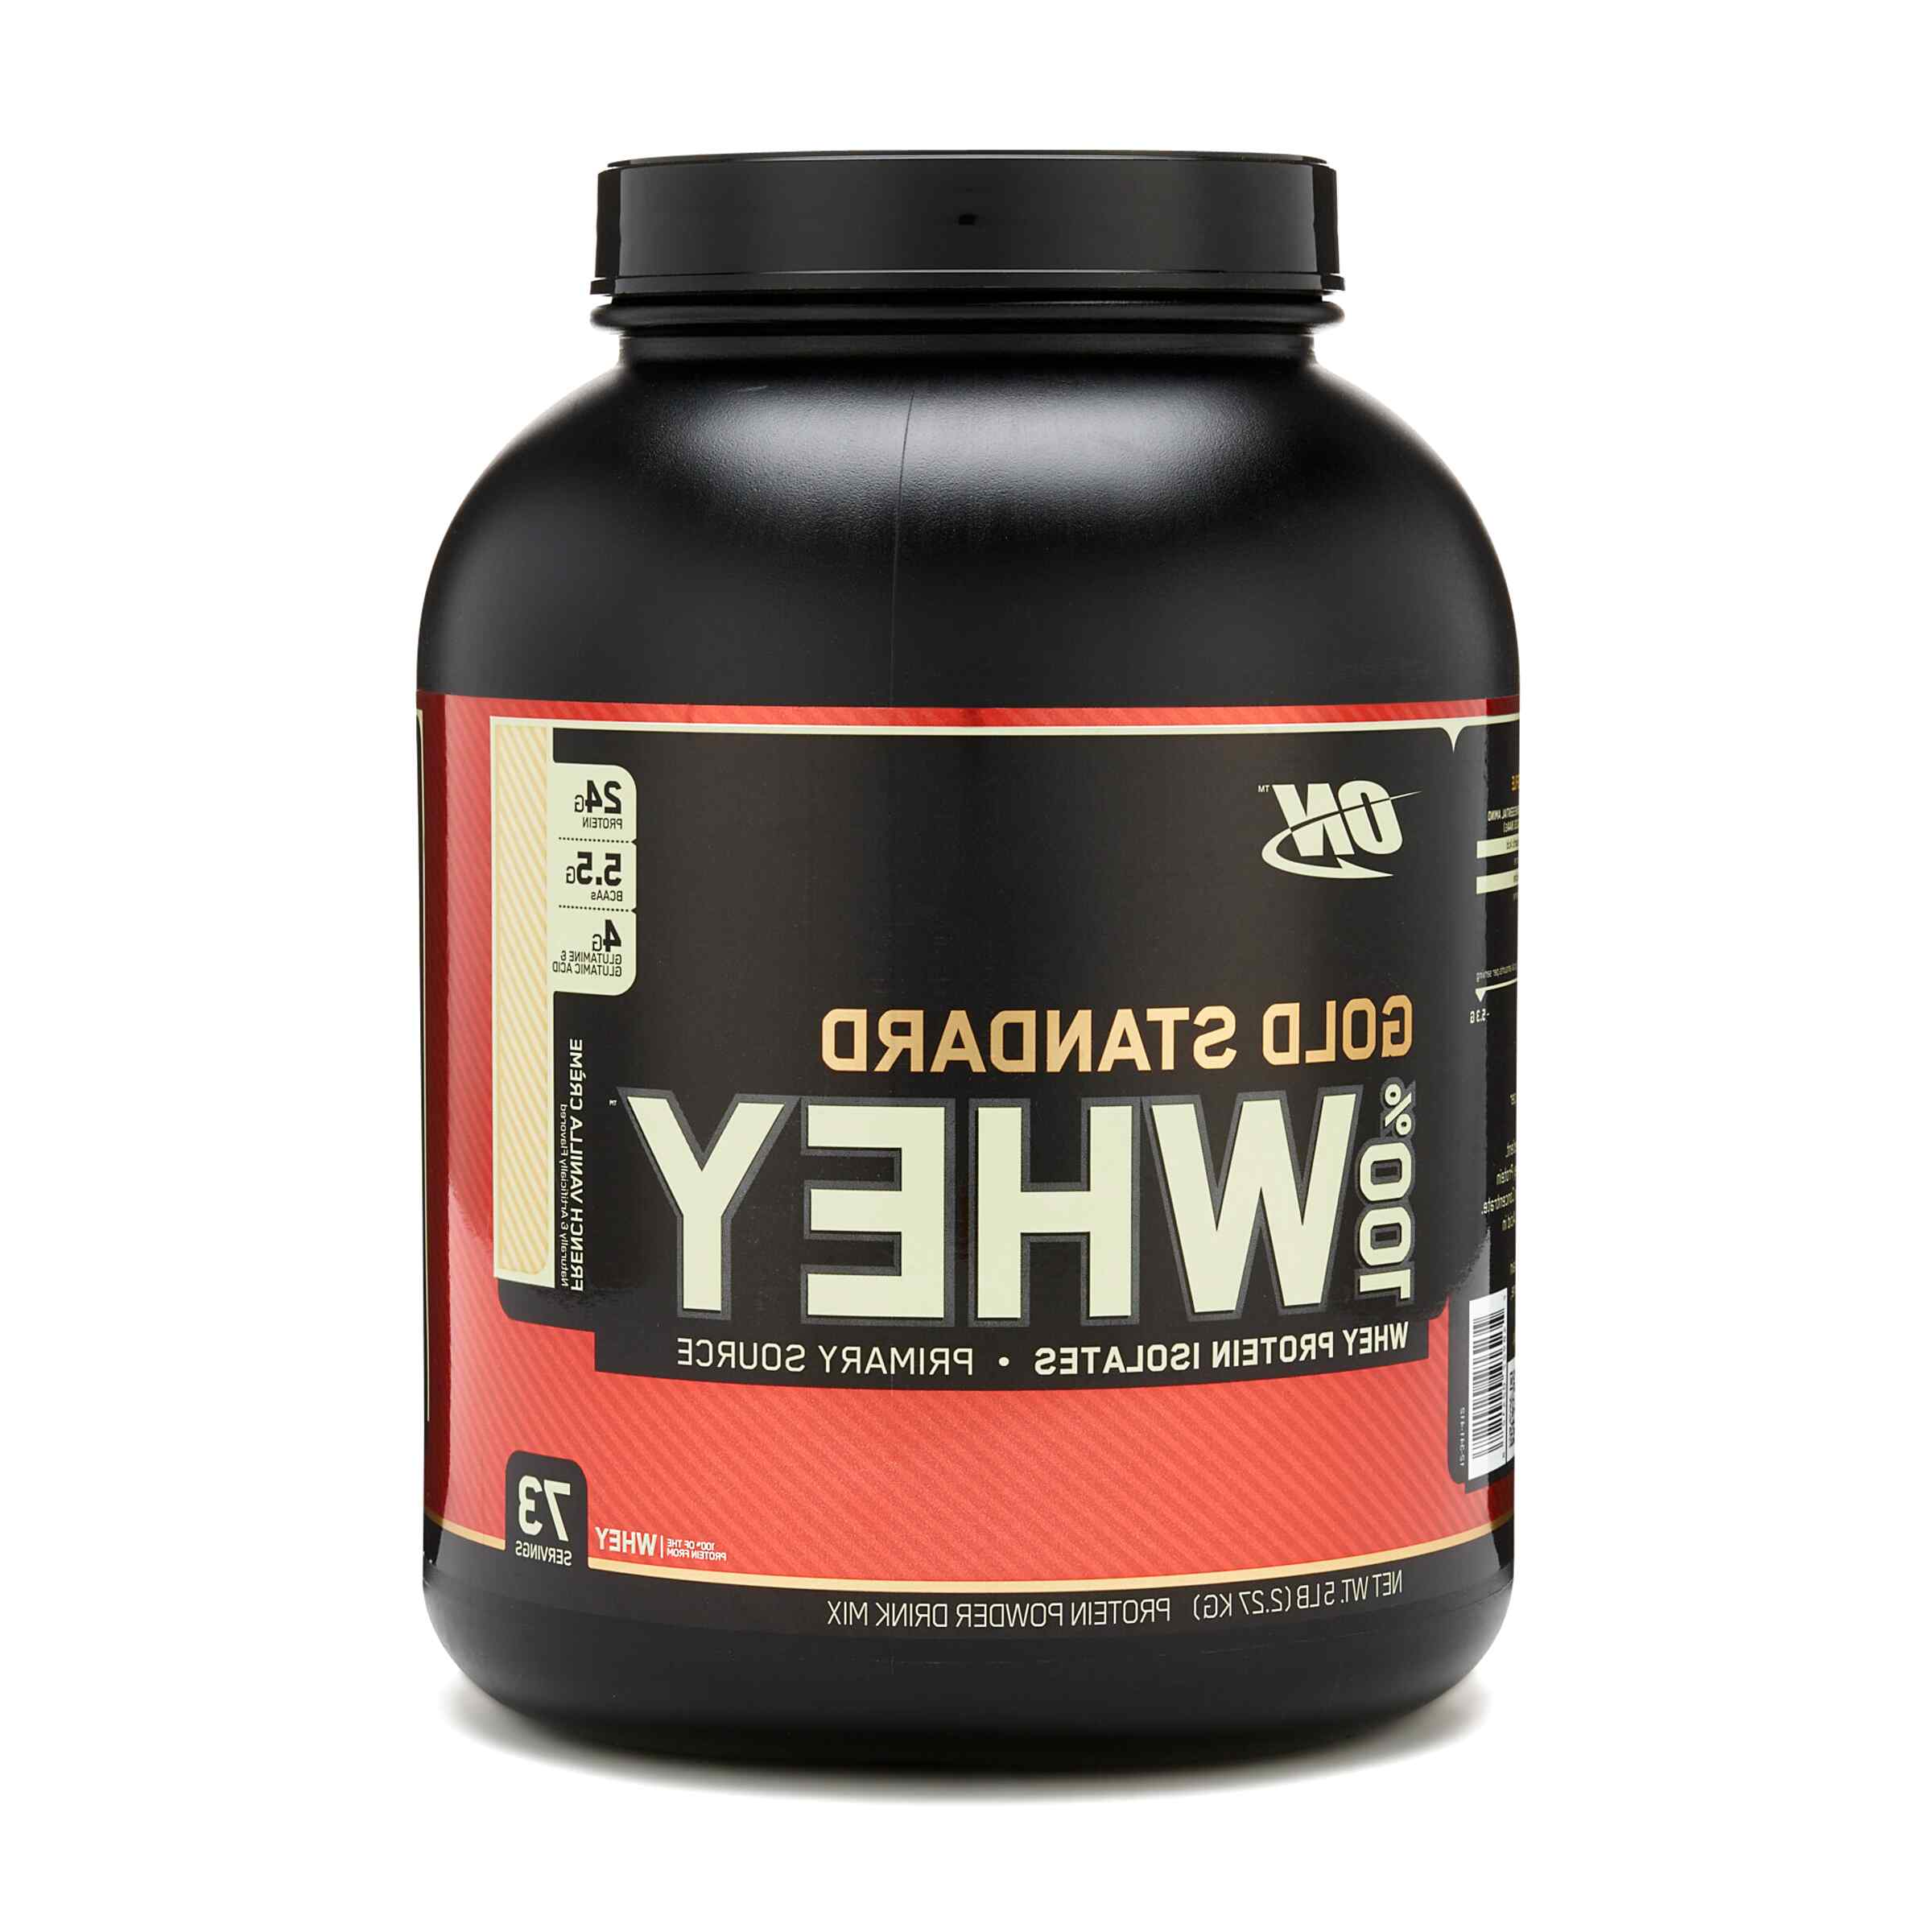 Whey Protein Powder for sale in UK | View 40 bargains